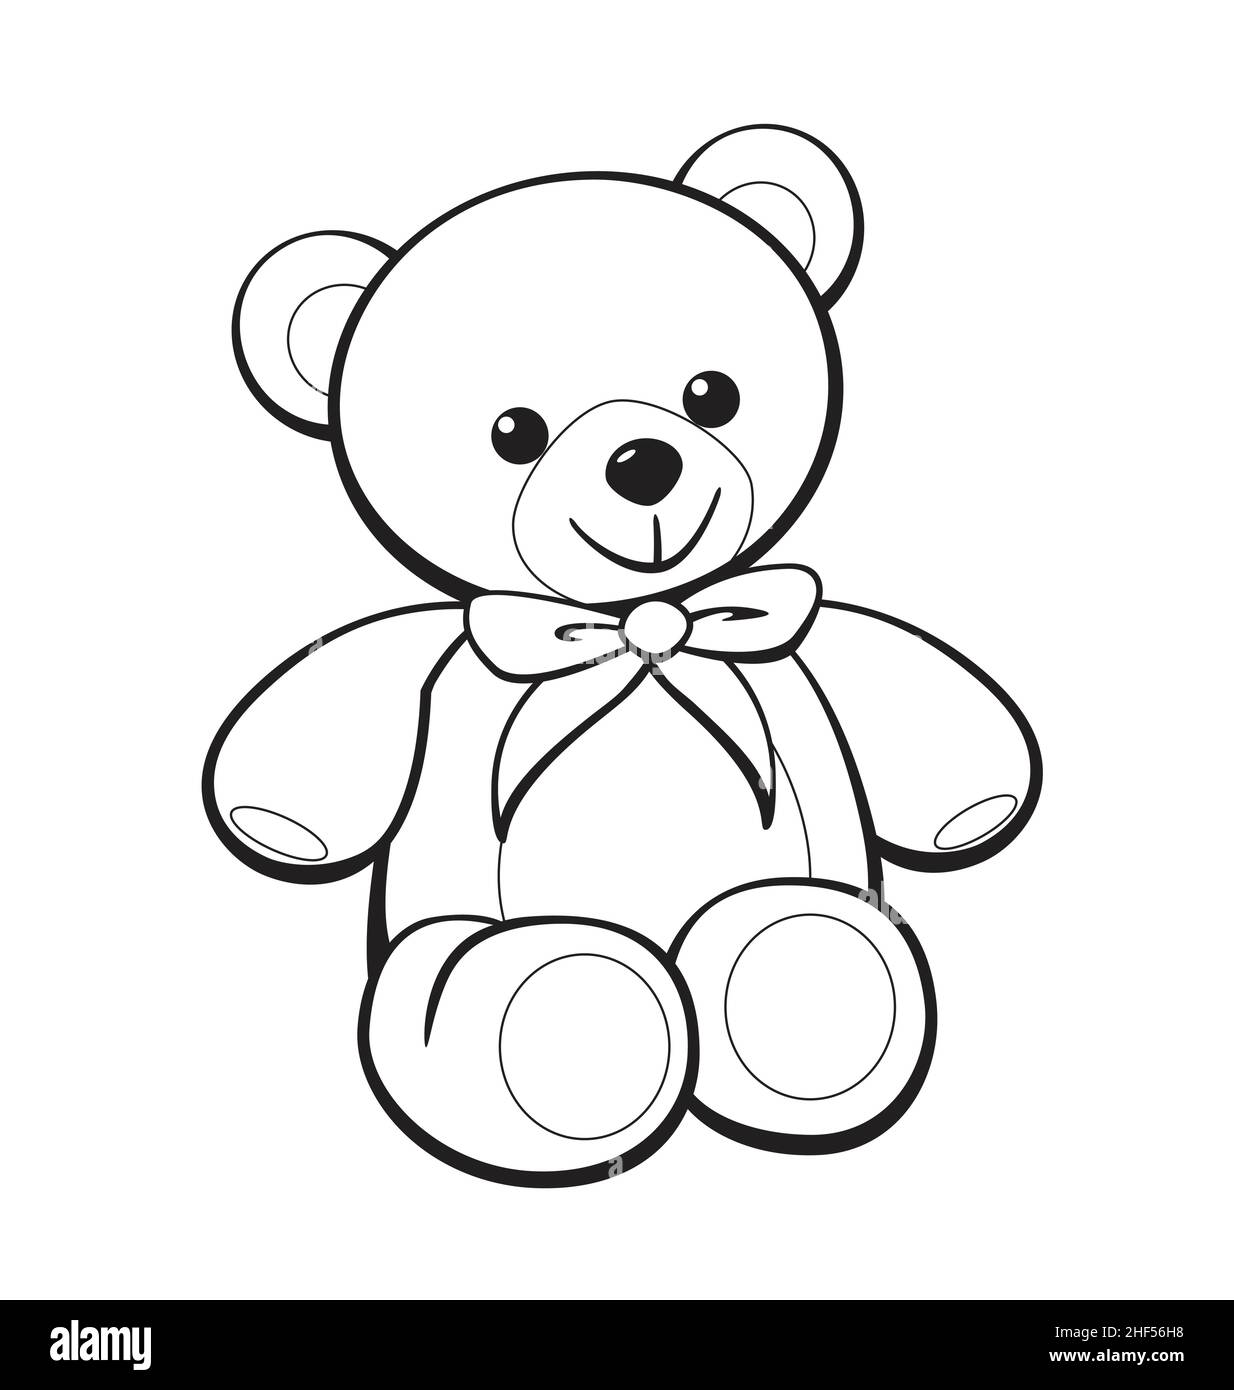 Cute smiling cartoon teddy bear for coloring in activity book image ...